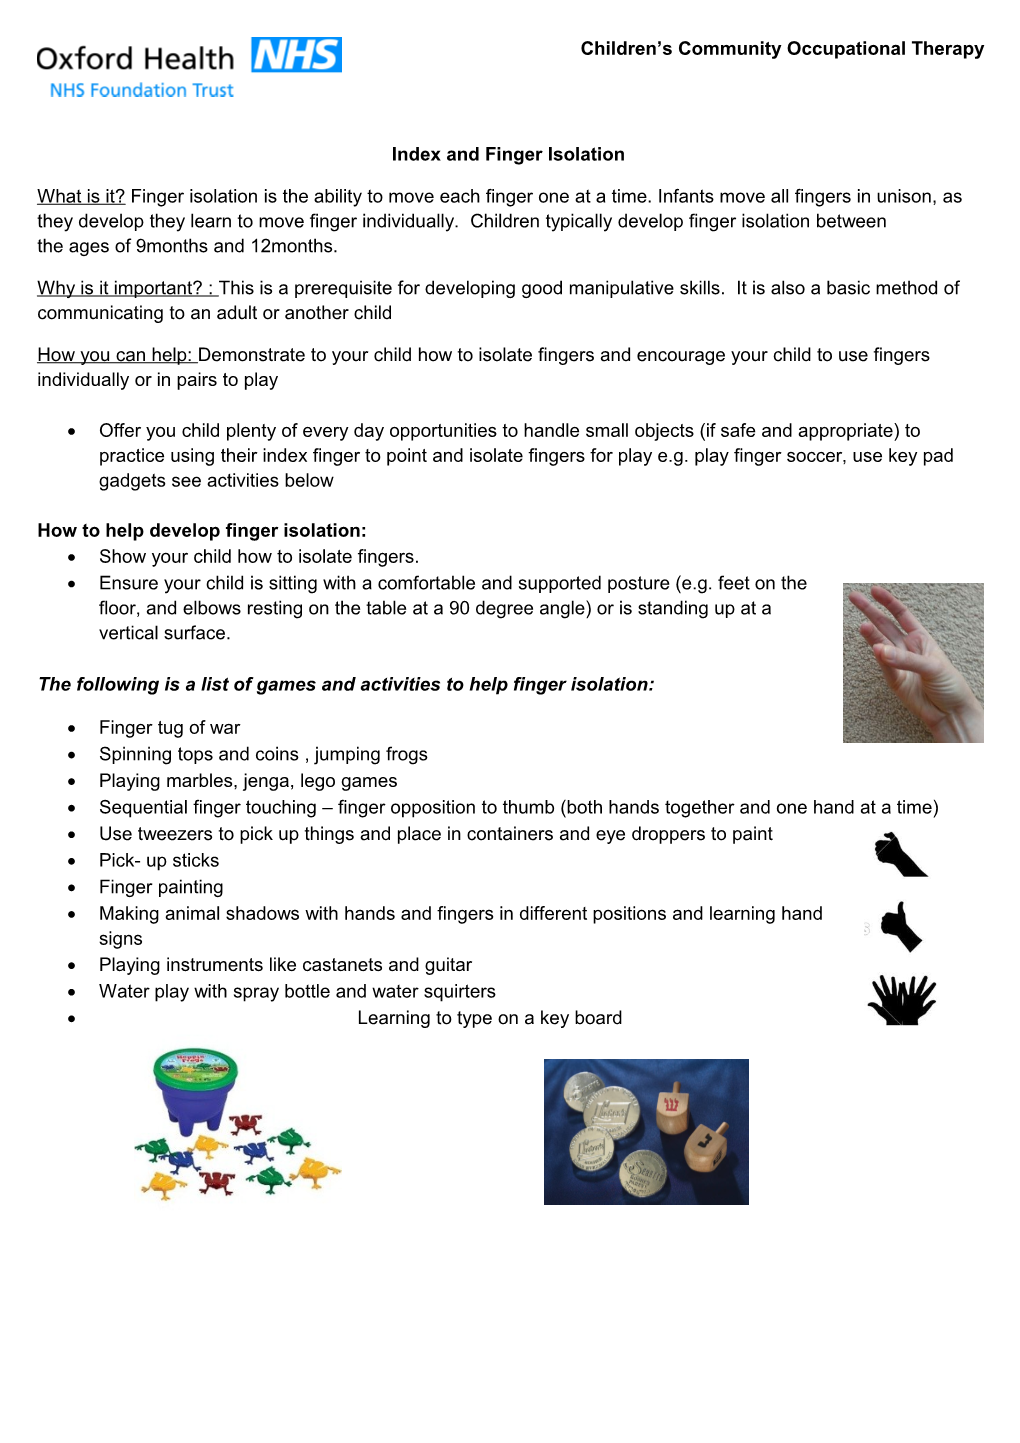 Index and Finger Isolation